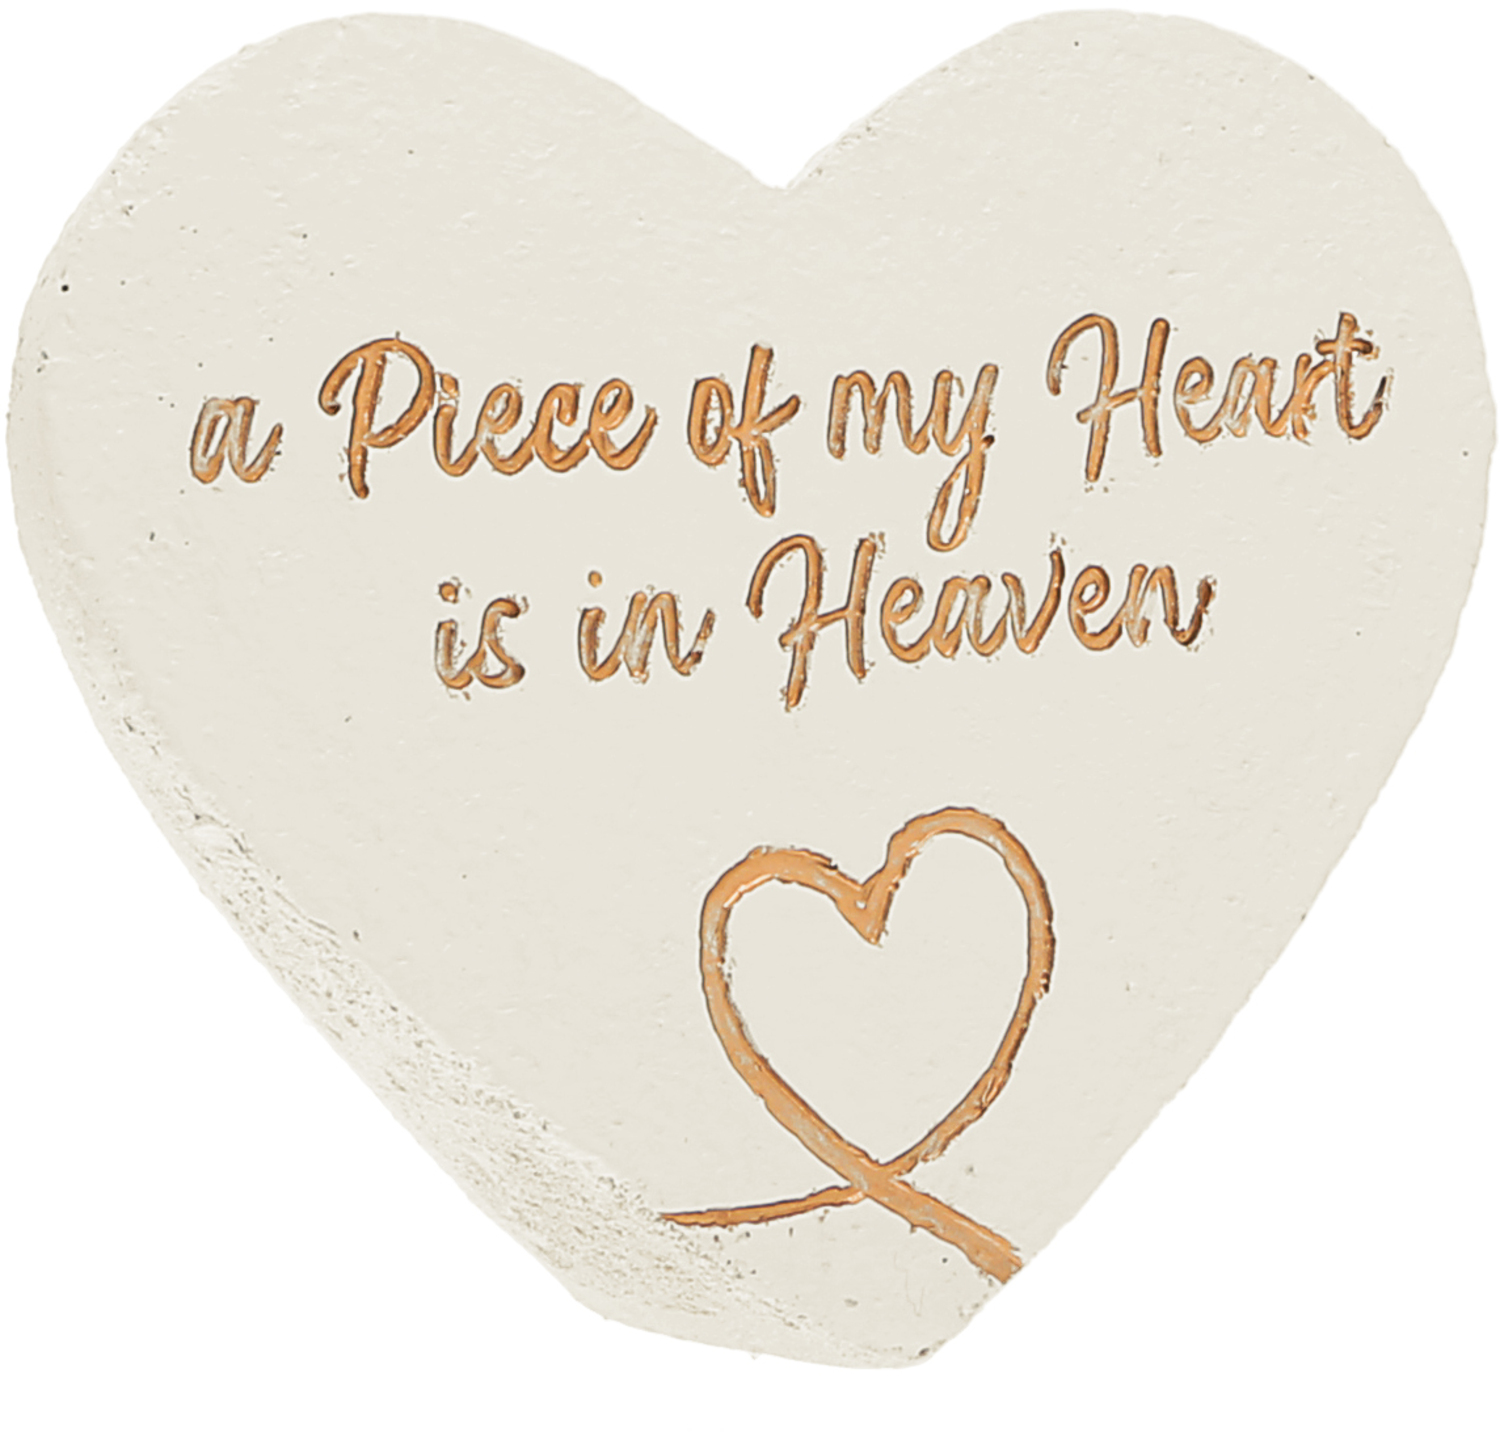 My Heart by Forever in our Hearts - My Heart - 3.5" x 3" Heart Memorial Stone